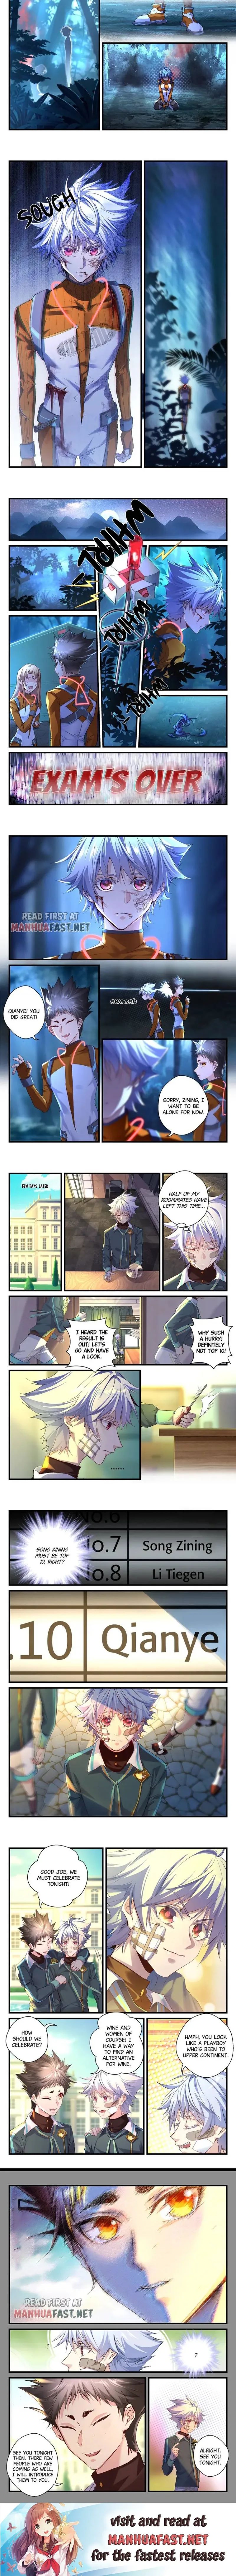 King Of The Eternal Night - Page 2